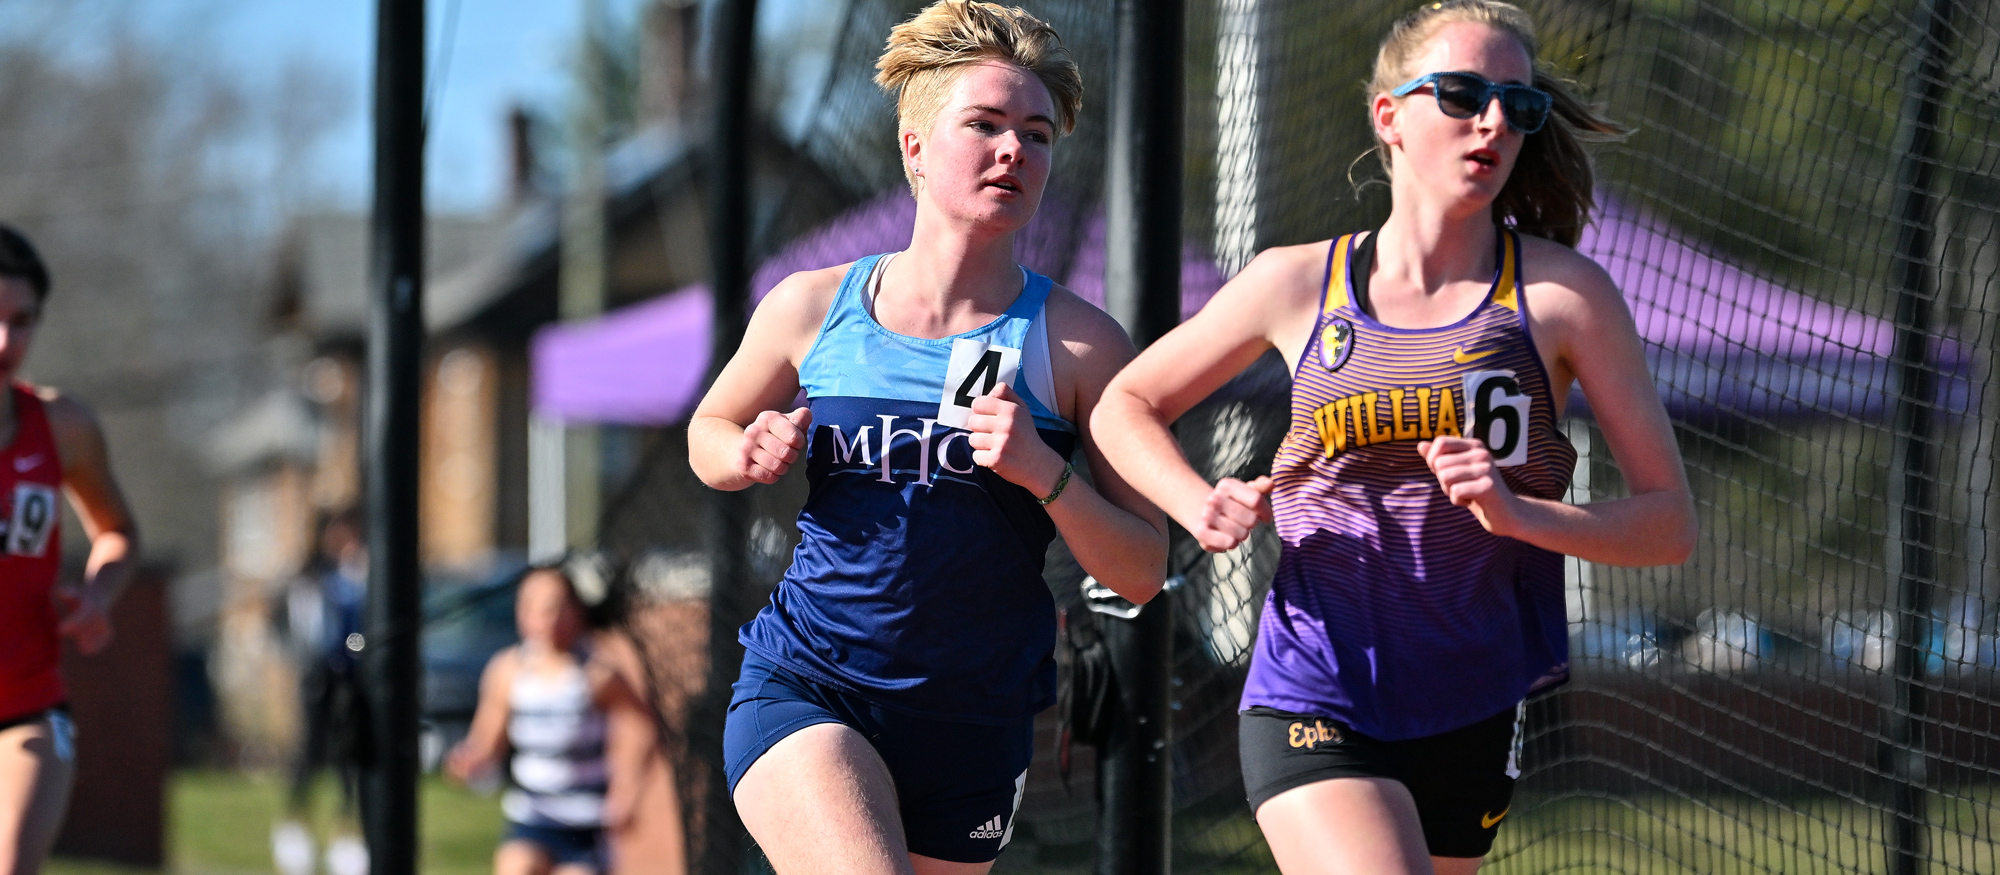 Tessa Lancaster was third out of 29 runners in the 1500 meters at the opening outdoor meet of the season on March 23, 2024 at Wesleyan University, with a time of 4:58.38. (RJB Sports file photo)